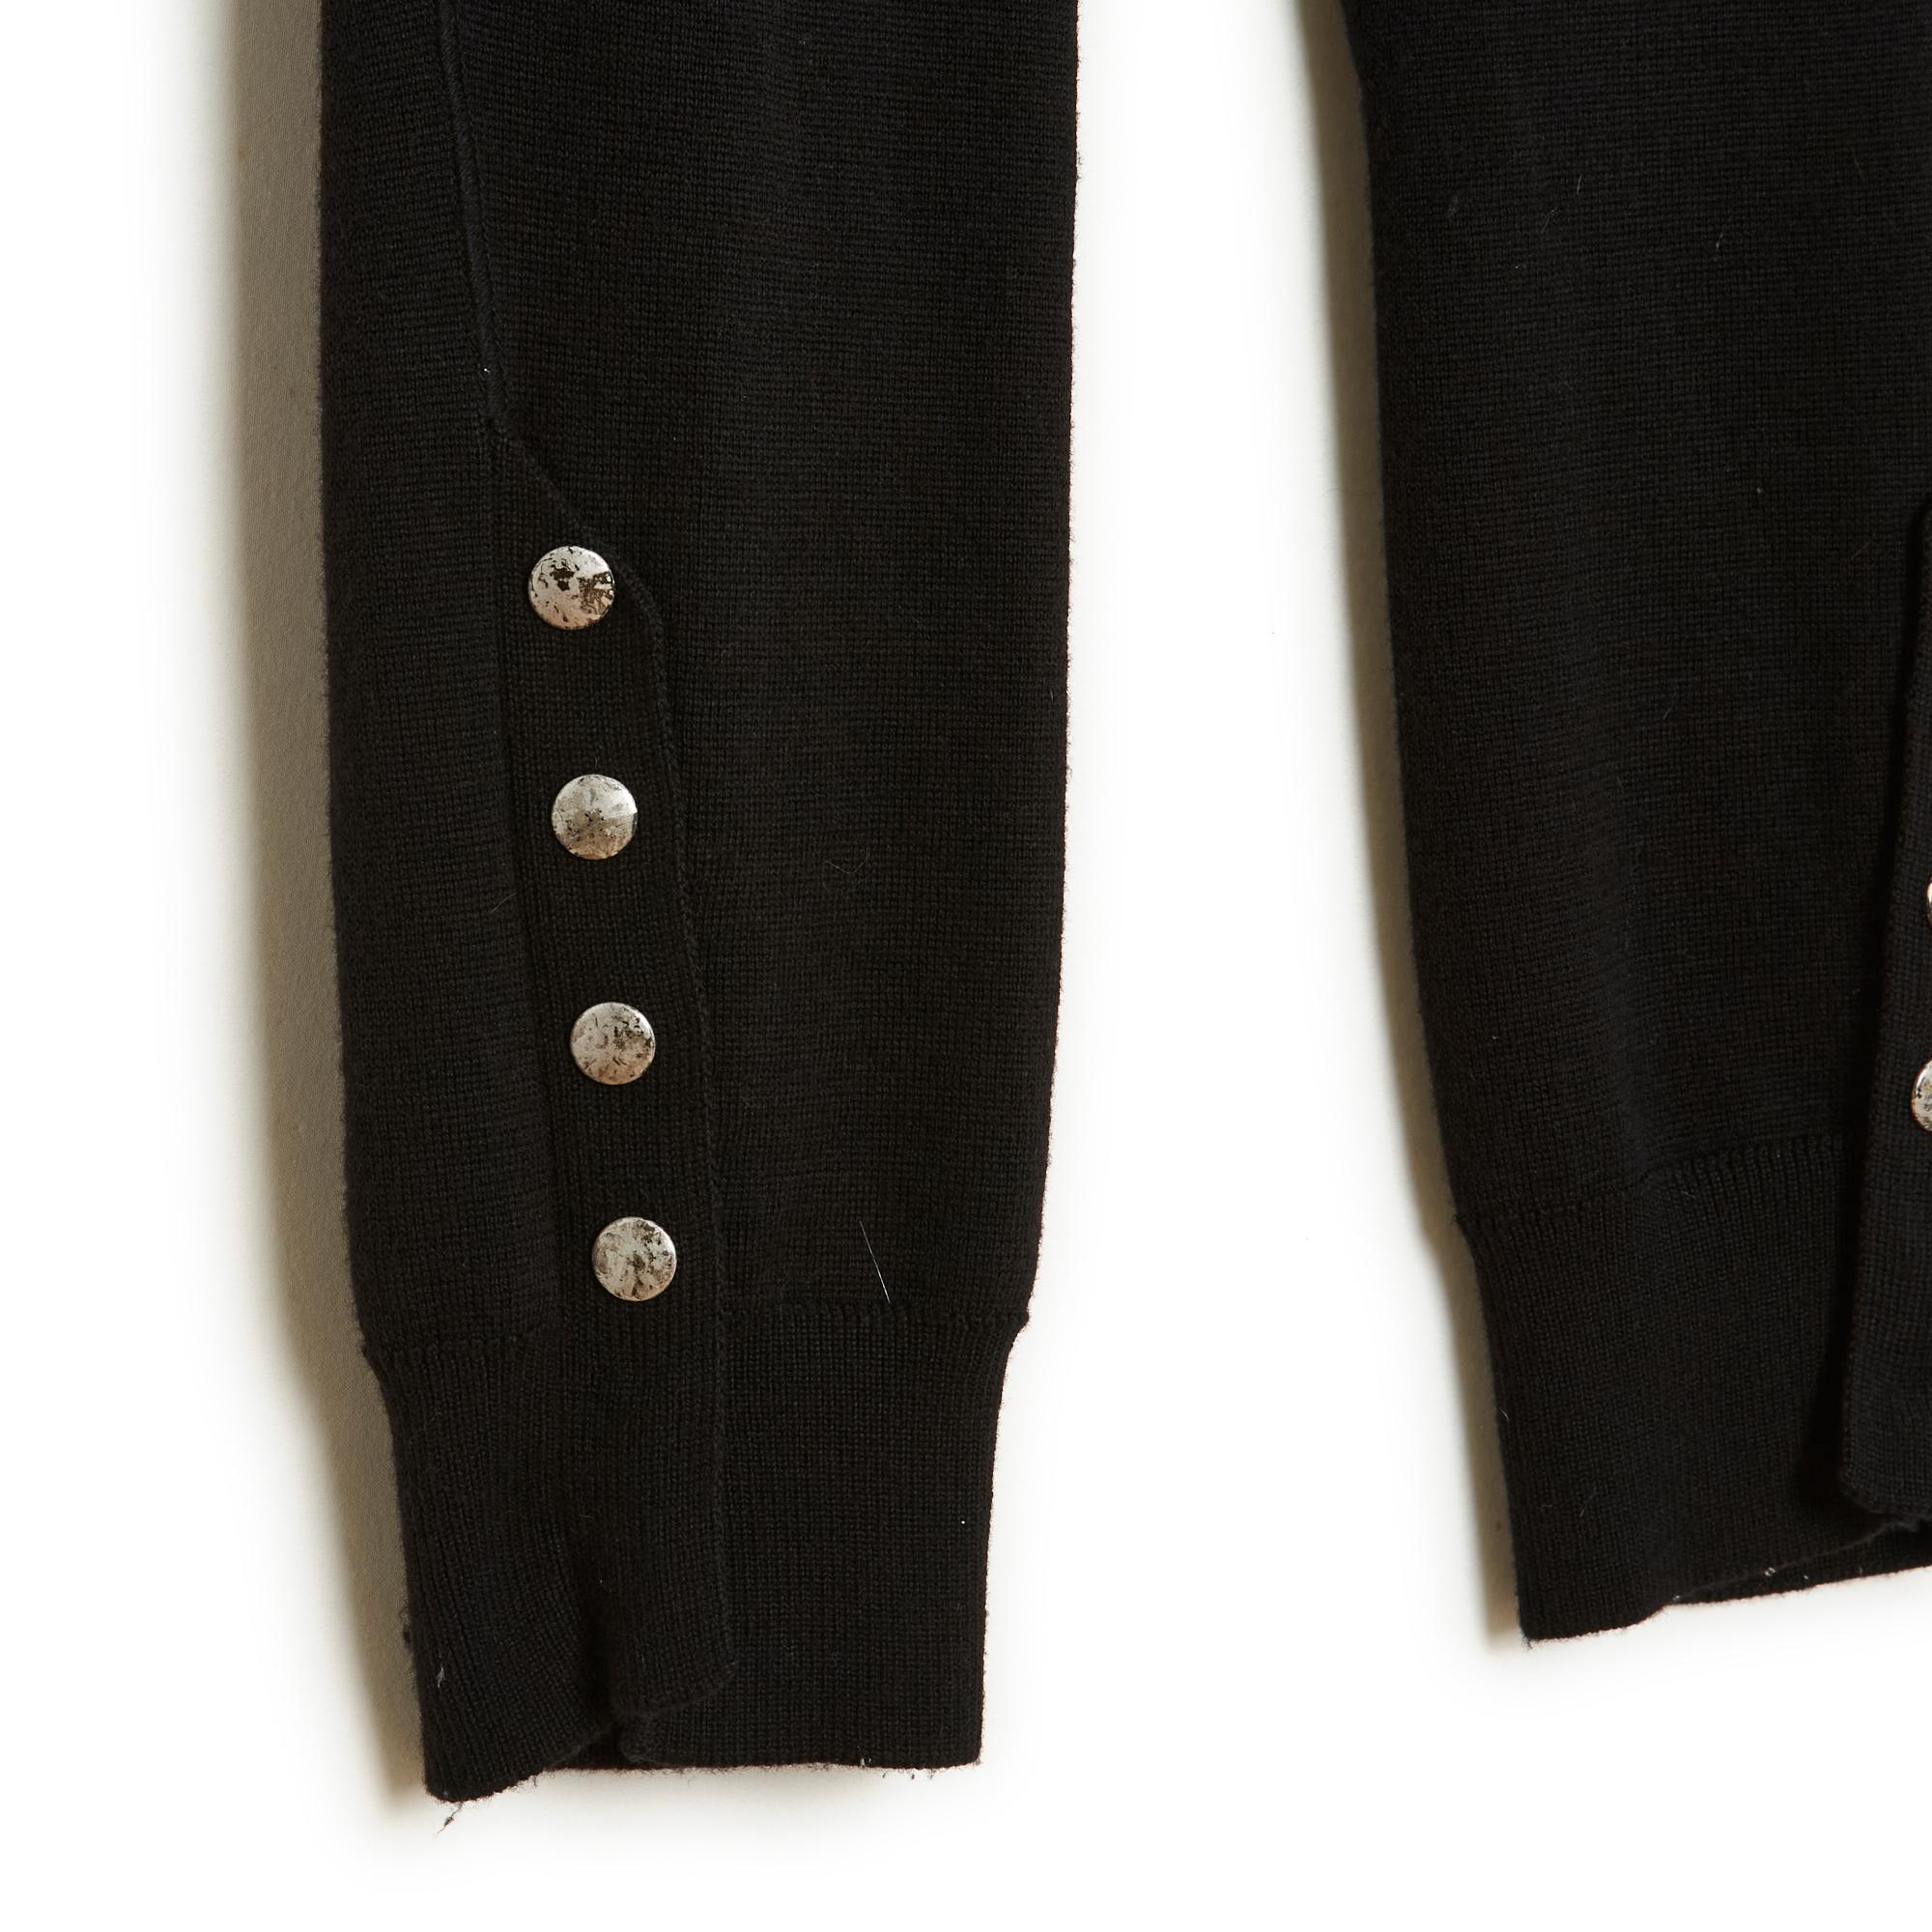 Alexander McQueen legging pants in black wool, jersey knit with mesh reinforcement at the crotch down to the ankles, riding style, elastic waist, bottom of the leg closed with 6 snaps, 4 of which are decorated with silver metal jewelry buttons. Size